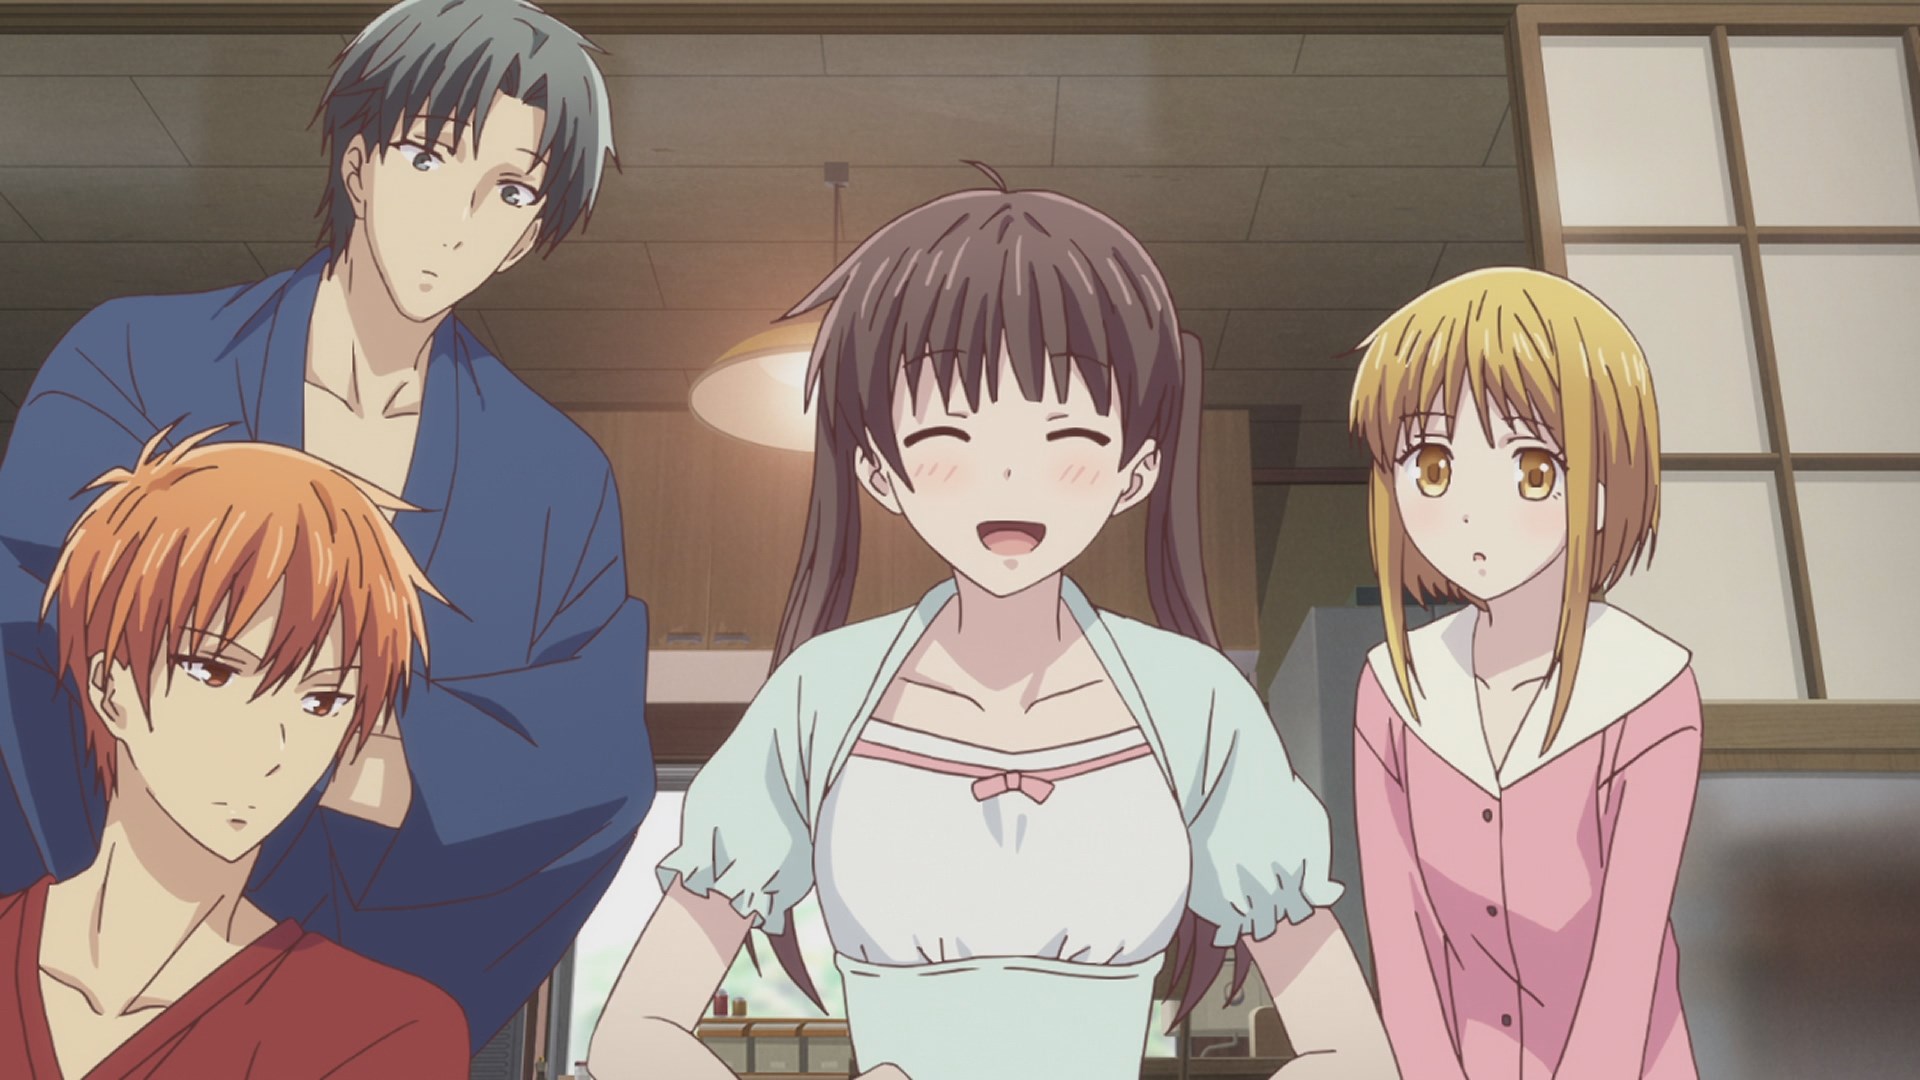 Fruits Basket 2019 Season 3 Review - The Game of Nerds